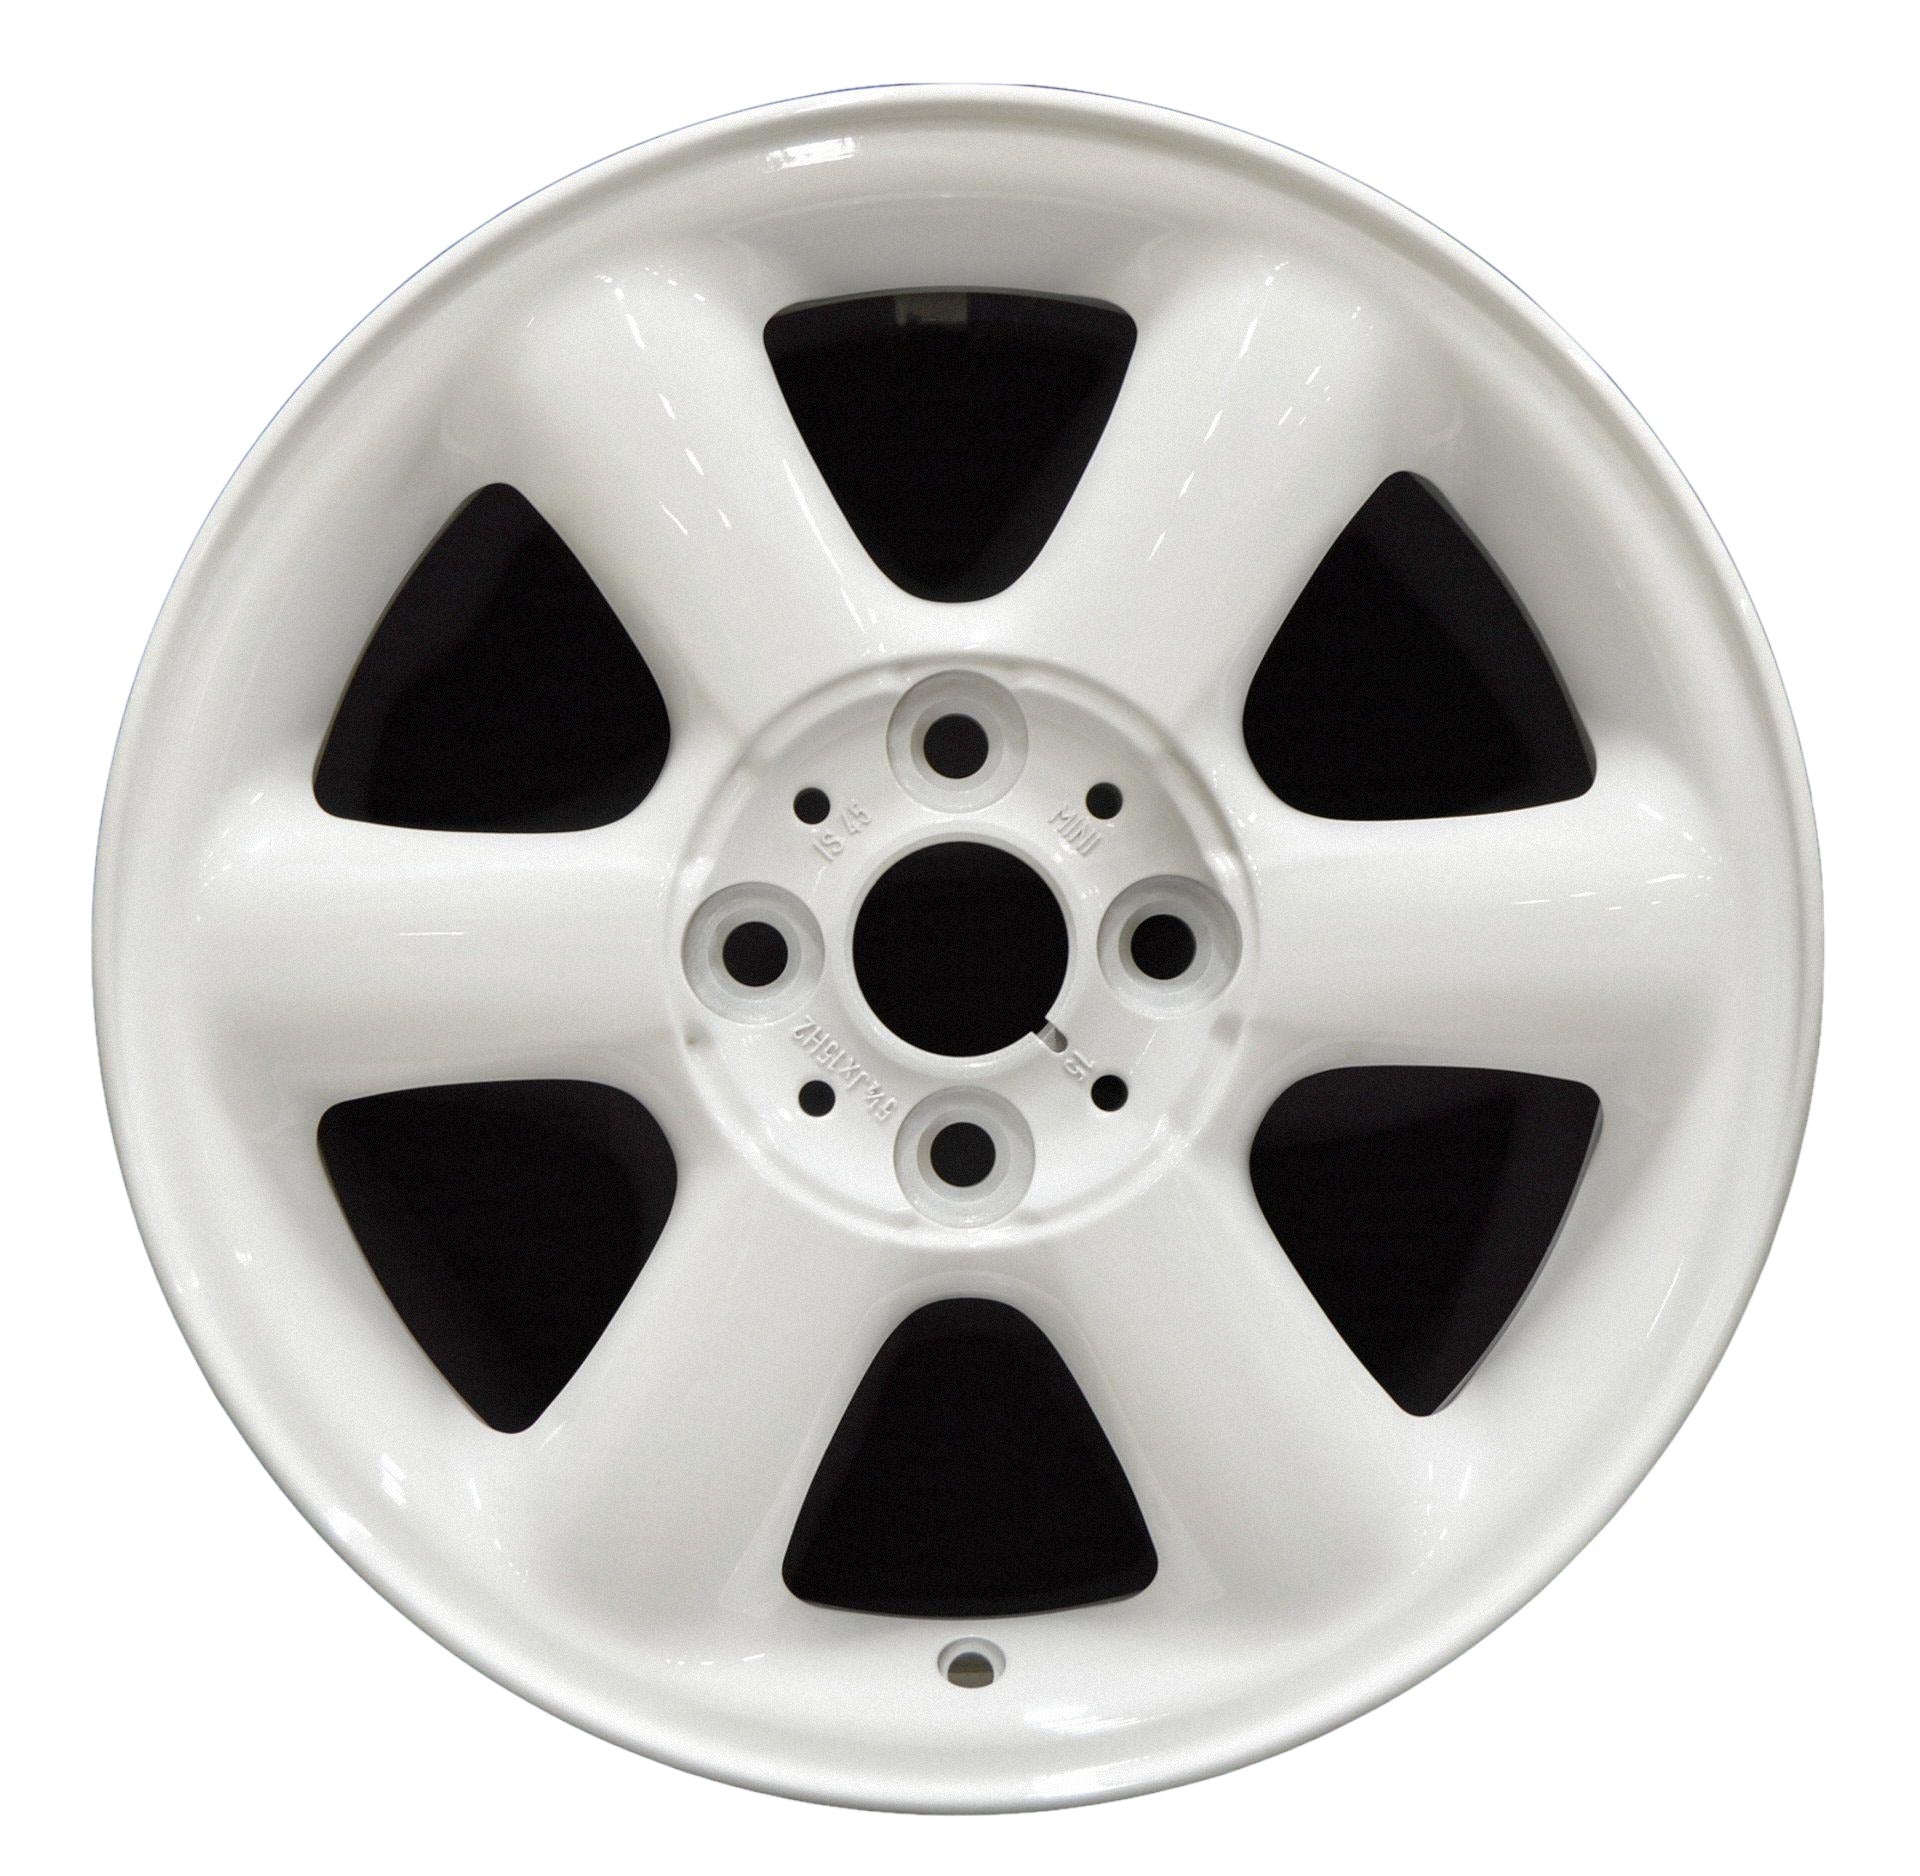 MINI Cooper Coupe  2011, 2012, 2013, 2014 Factory OEM Car Wheel Size 15x5.5 Alloy WAO.71191.PW01.FF